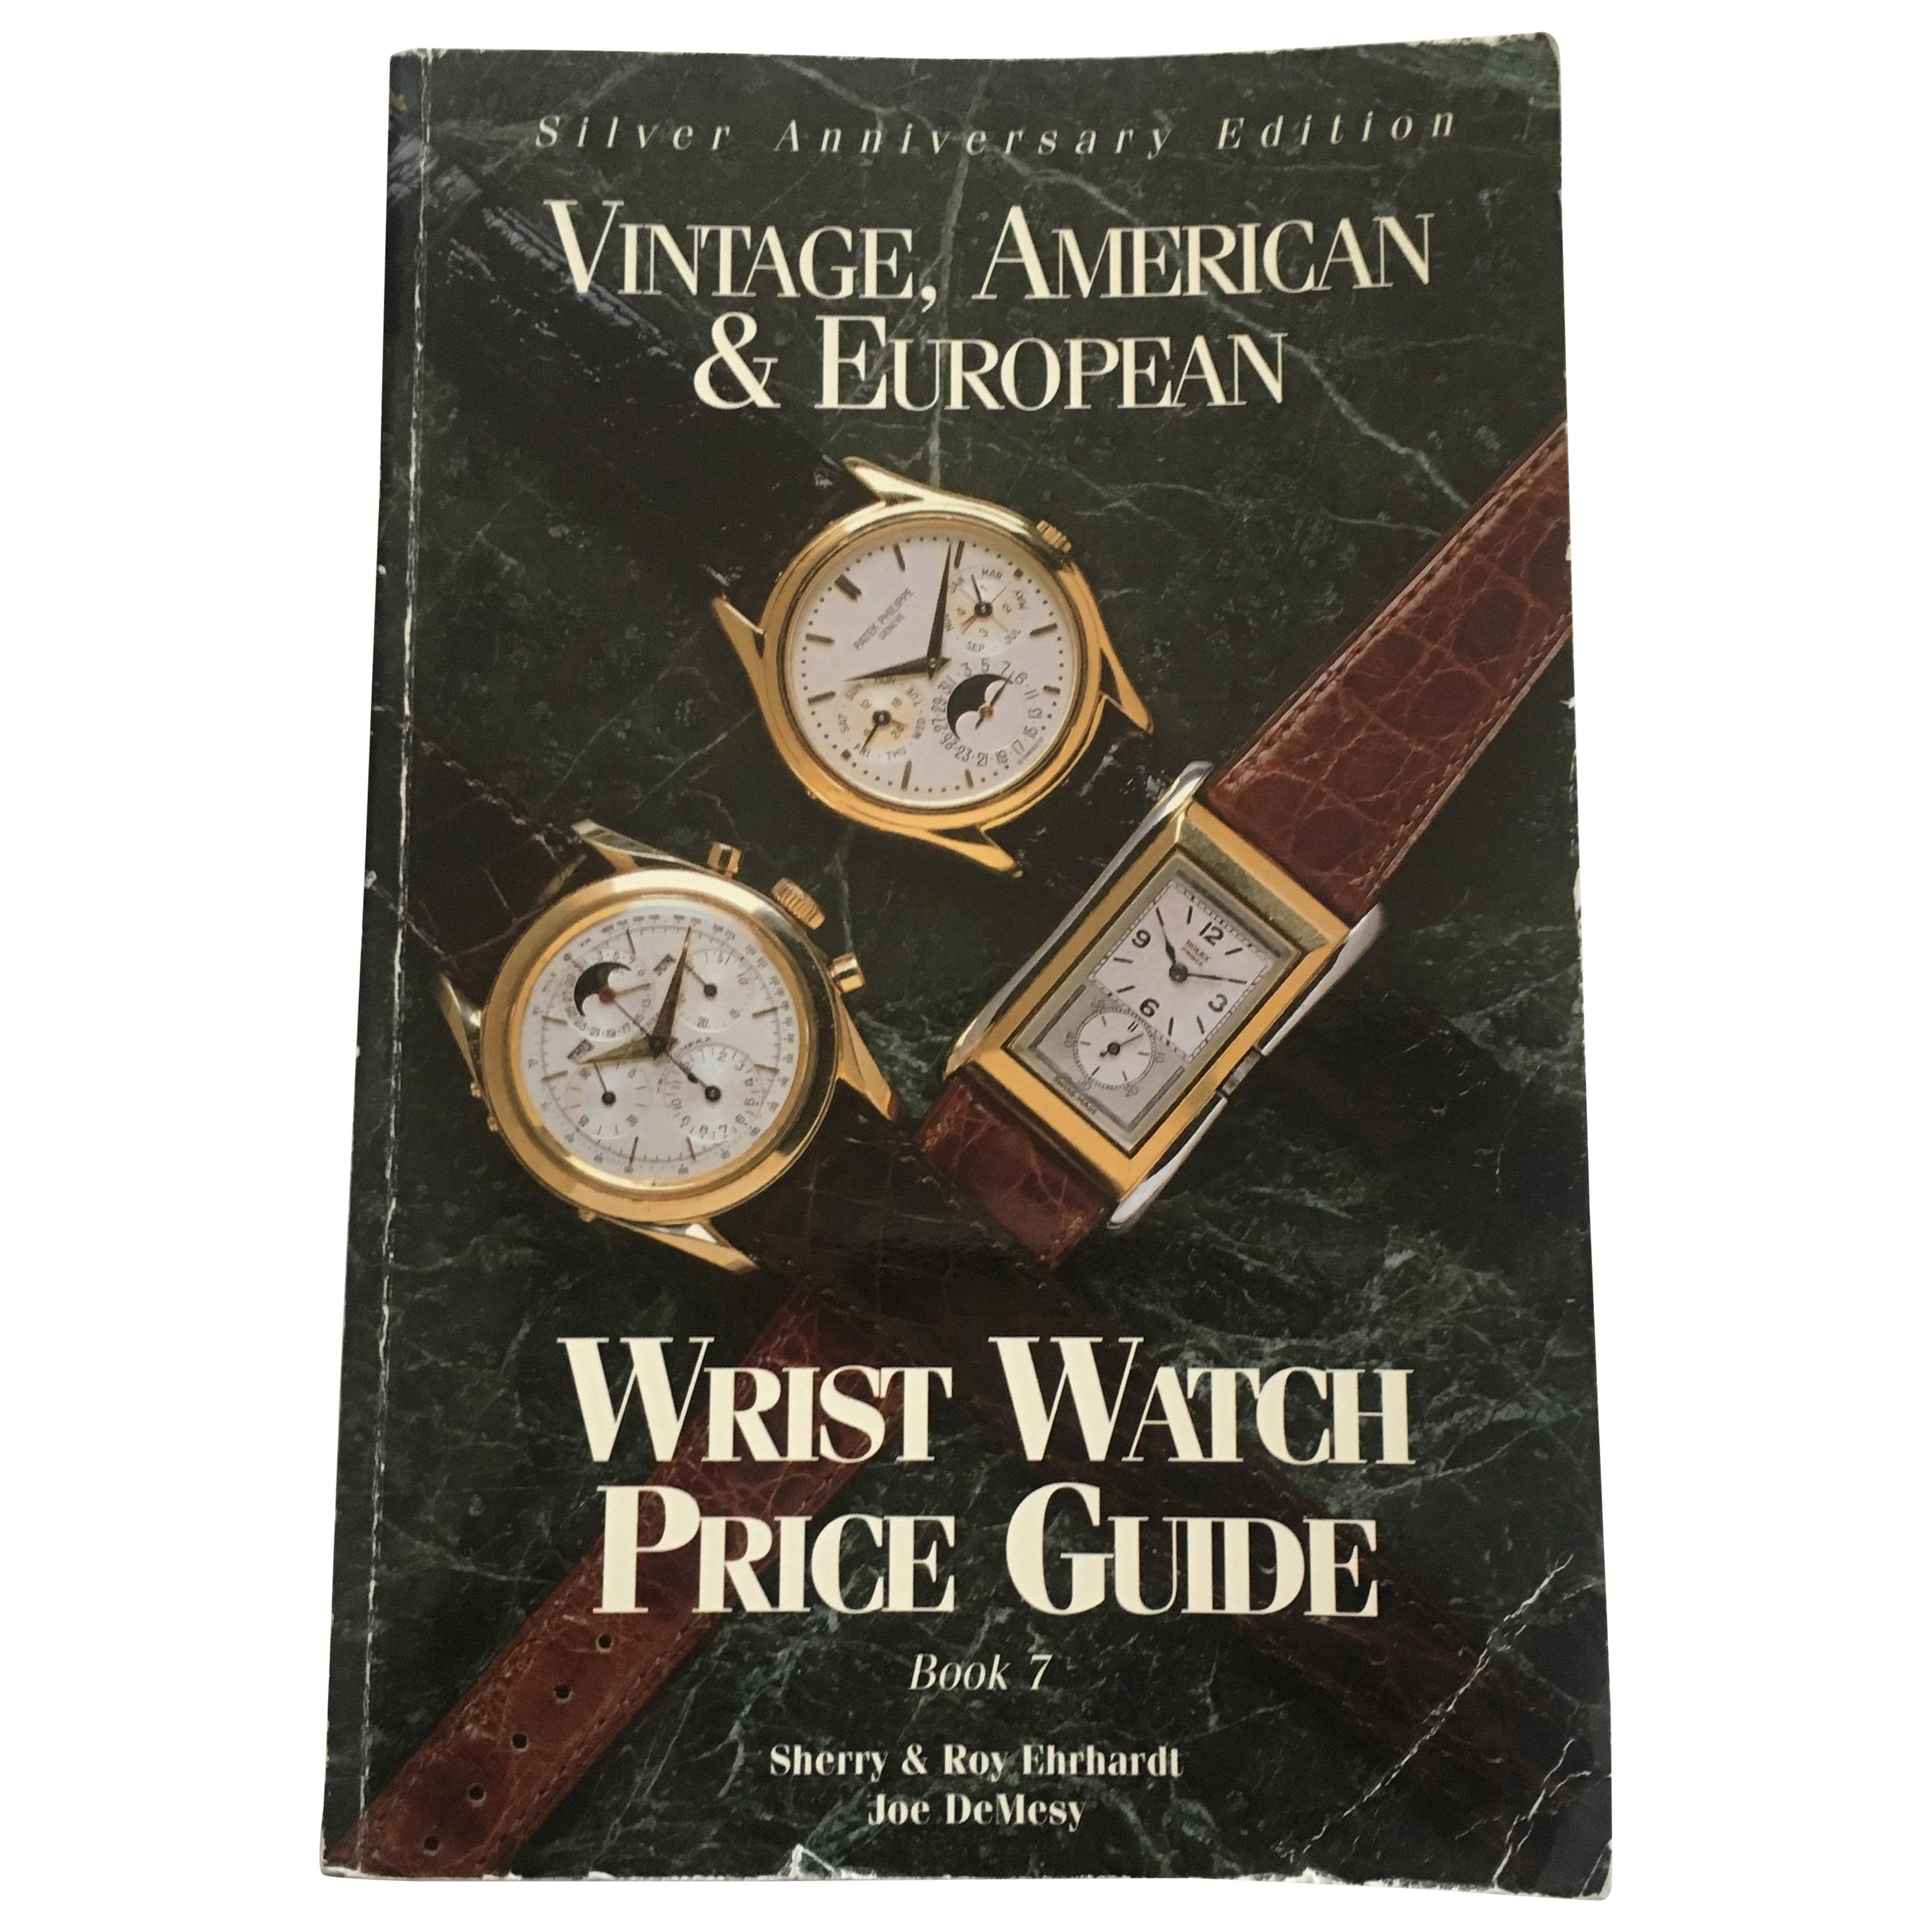 Vintage American & European Silver Anniversary Wristwatch Price Guide Published 